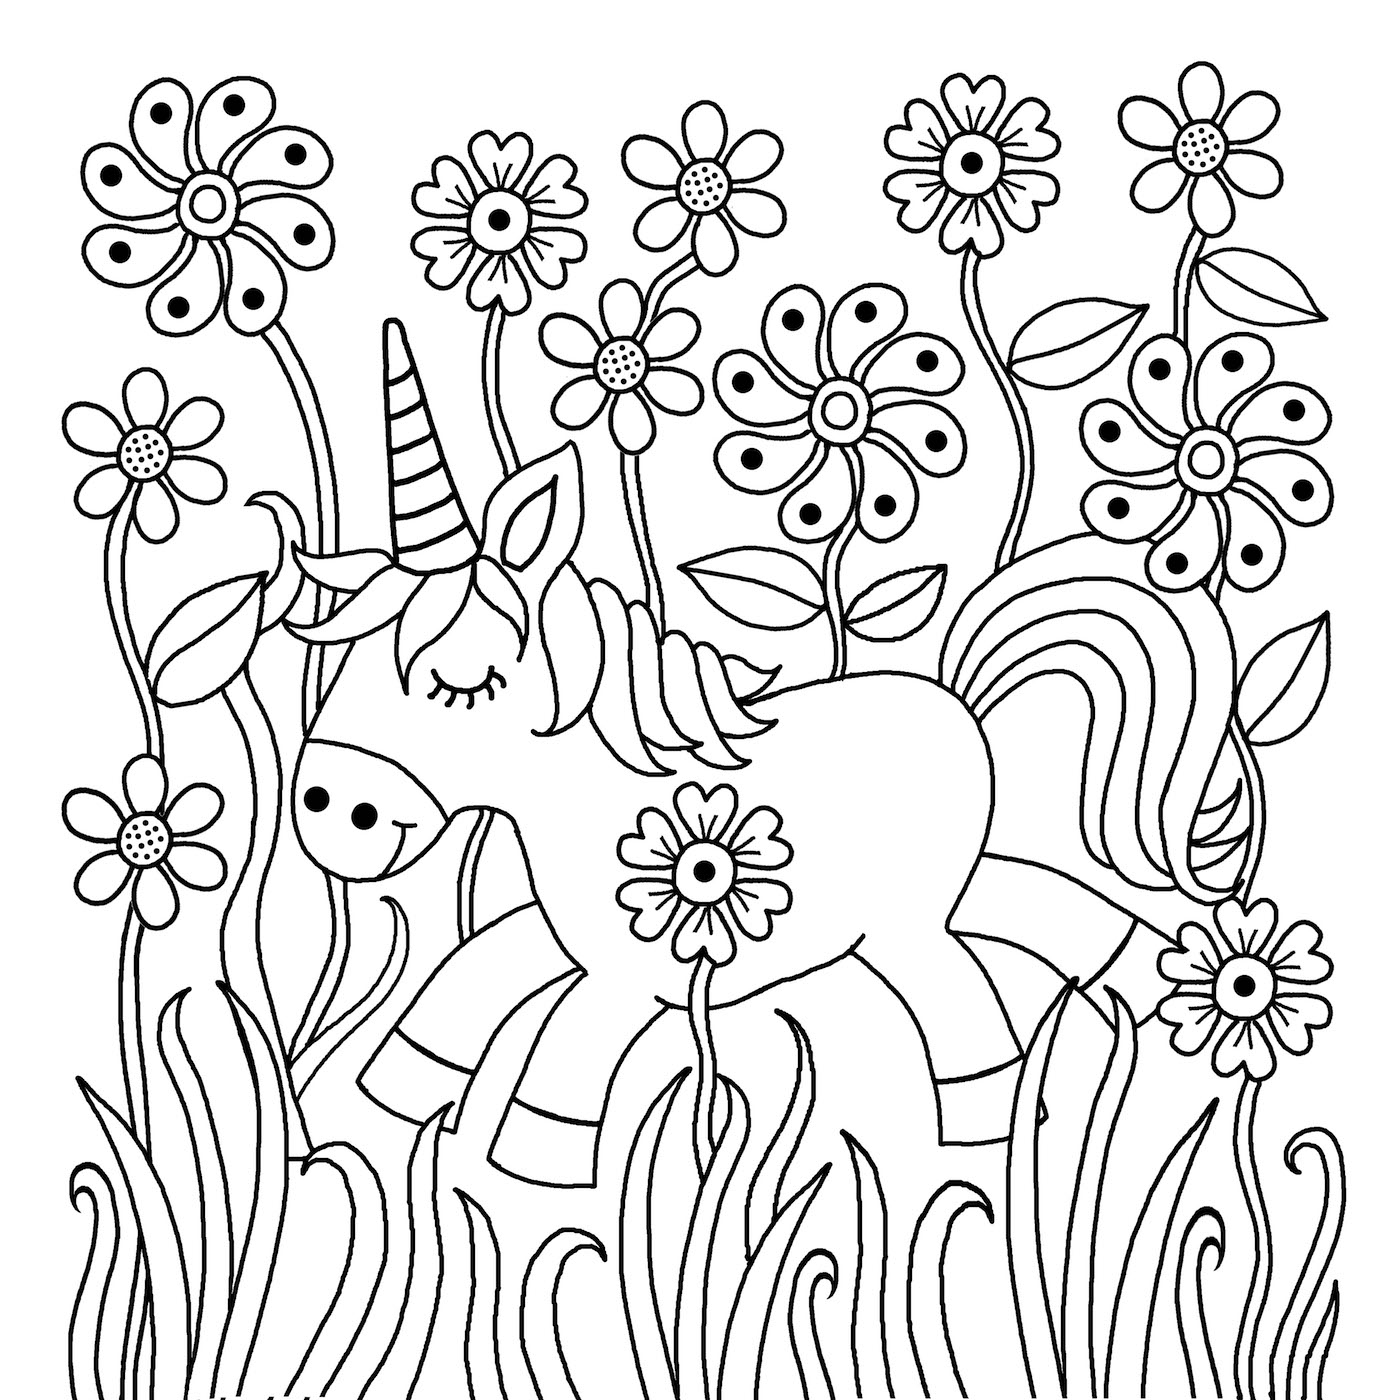 free-printable-unicorn-colouring-pages-for-kids-buster-children-s-books